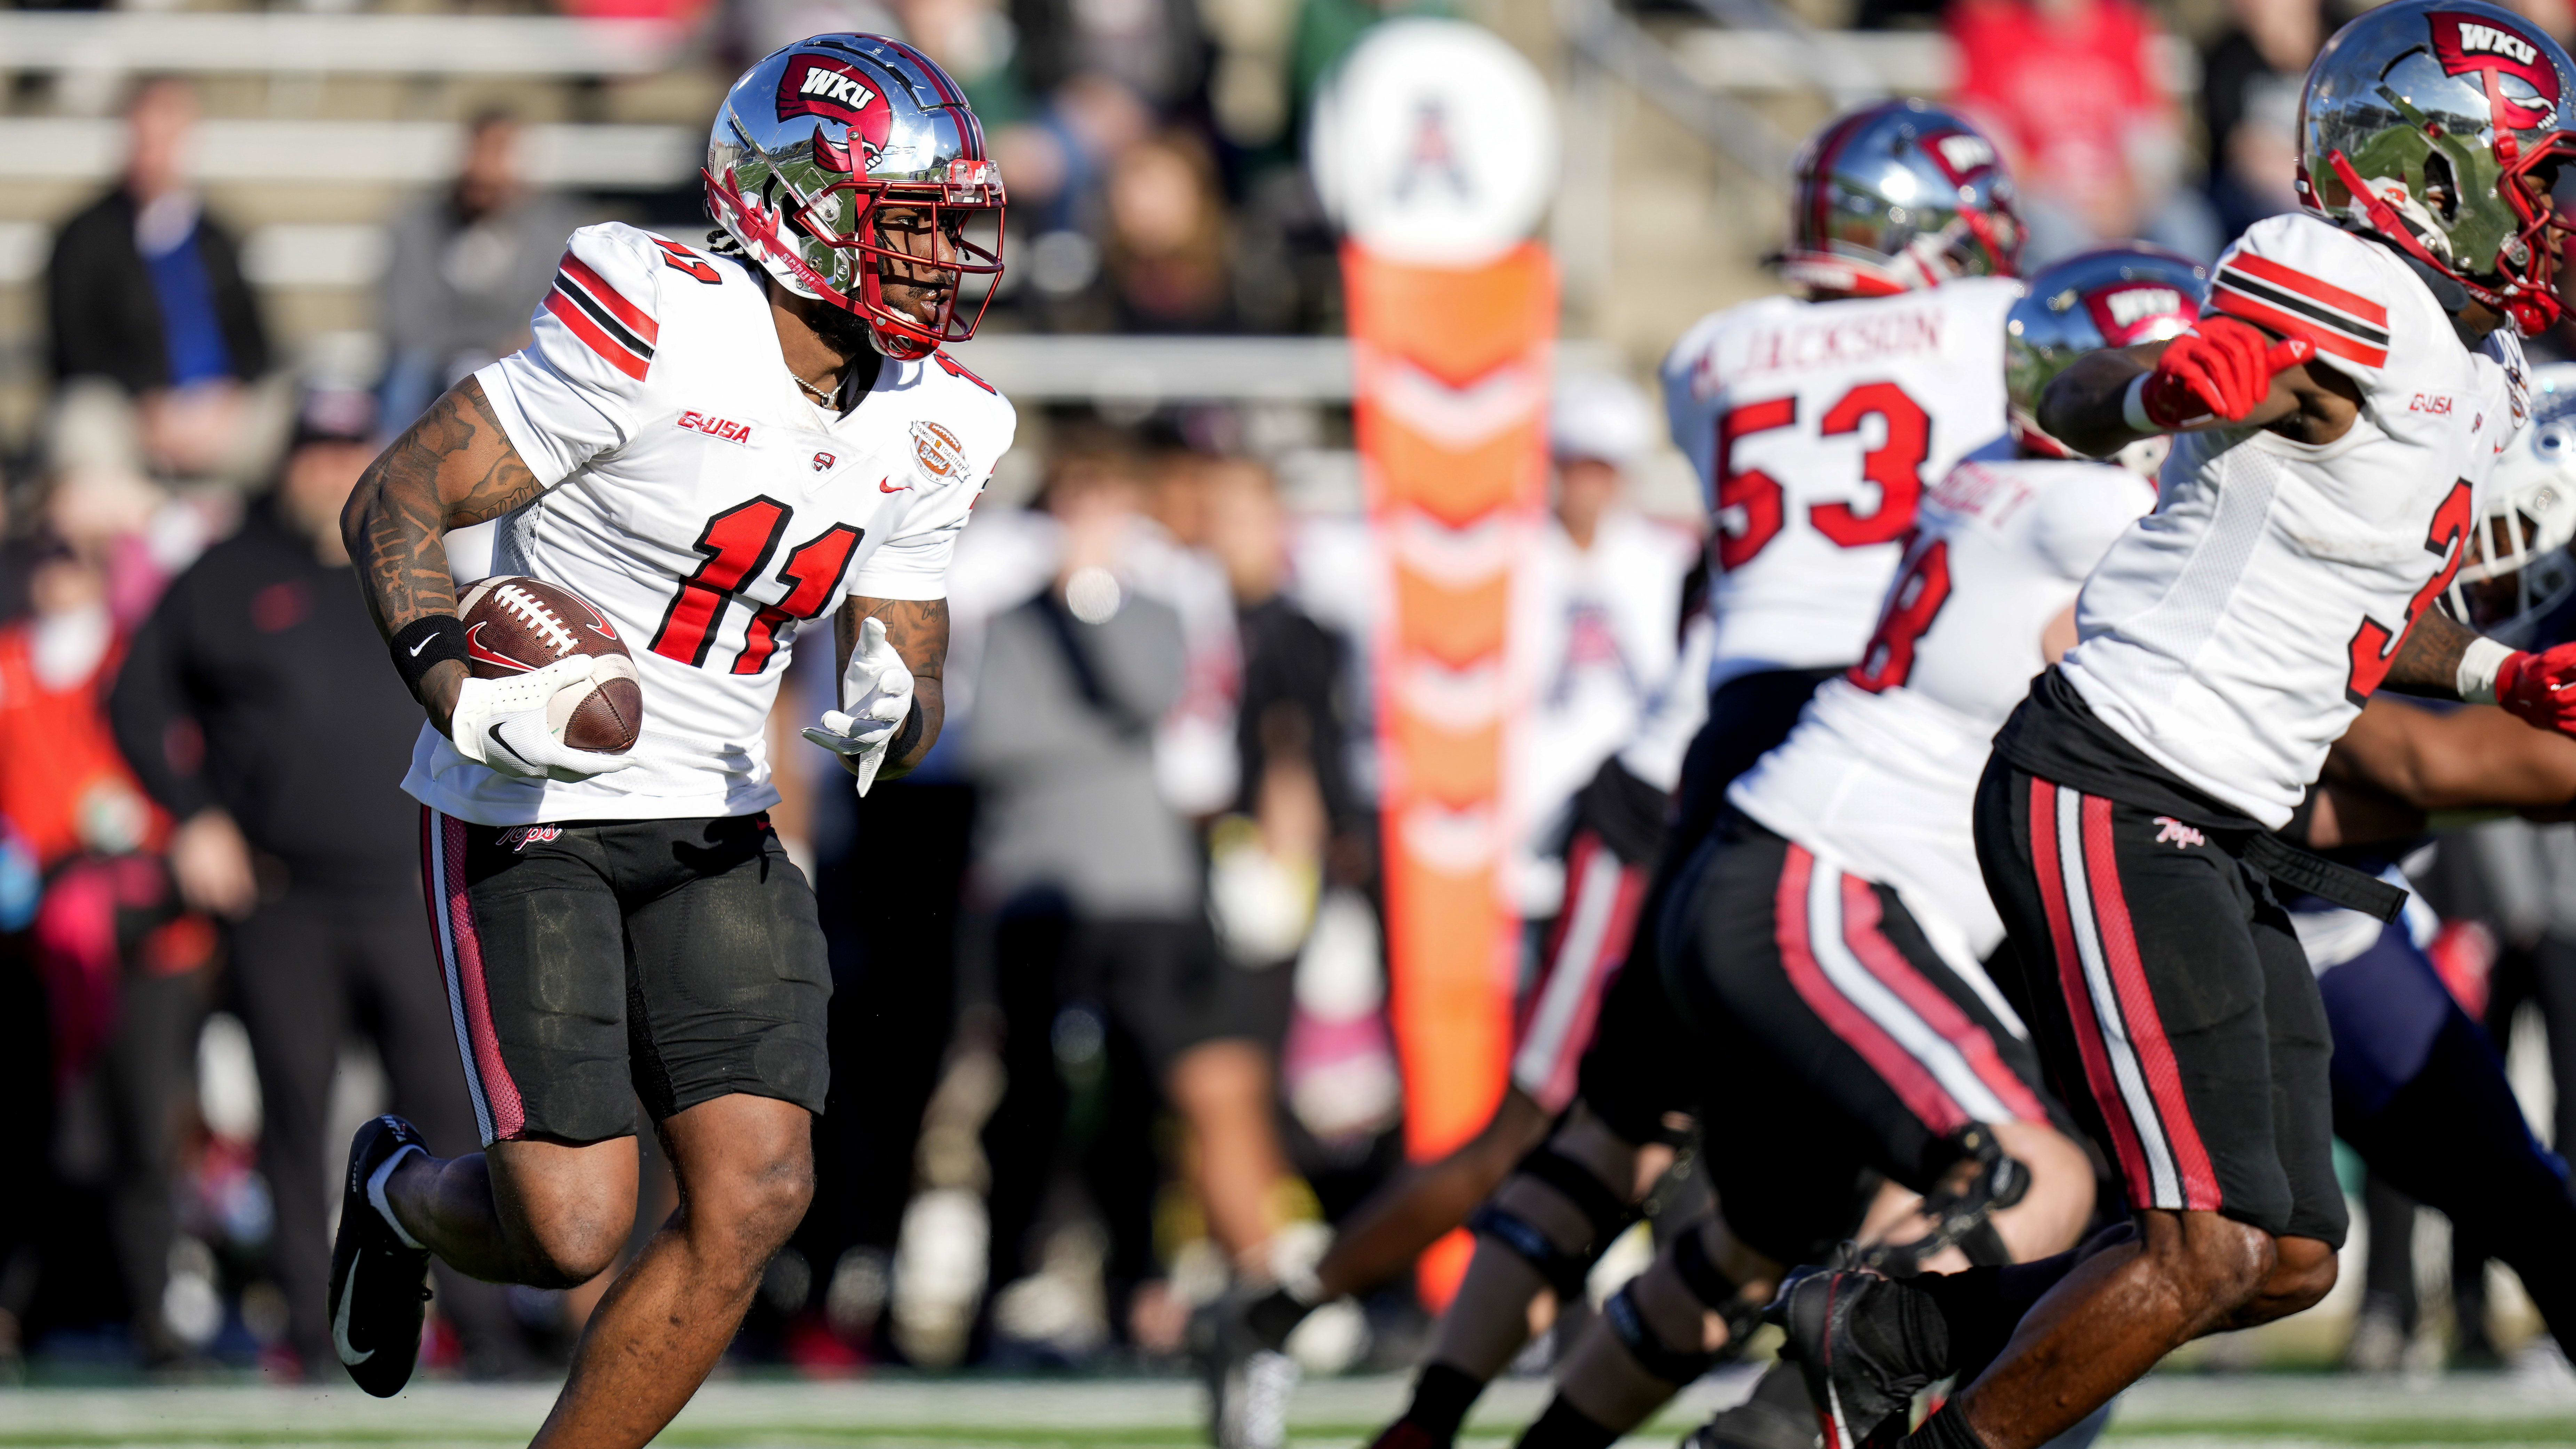 Western Kentucky Hilltoppers wide receiver Malachi Corley (11) runs the ball against the Old Dominion Monarchs.